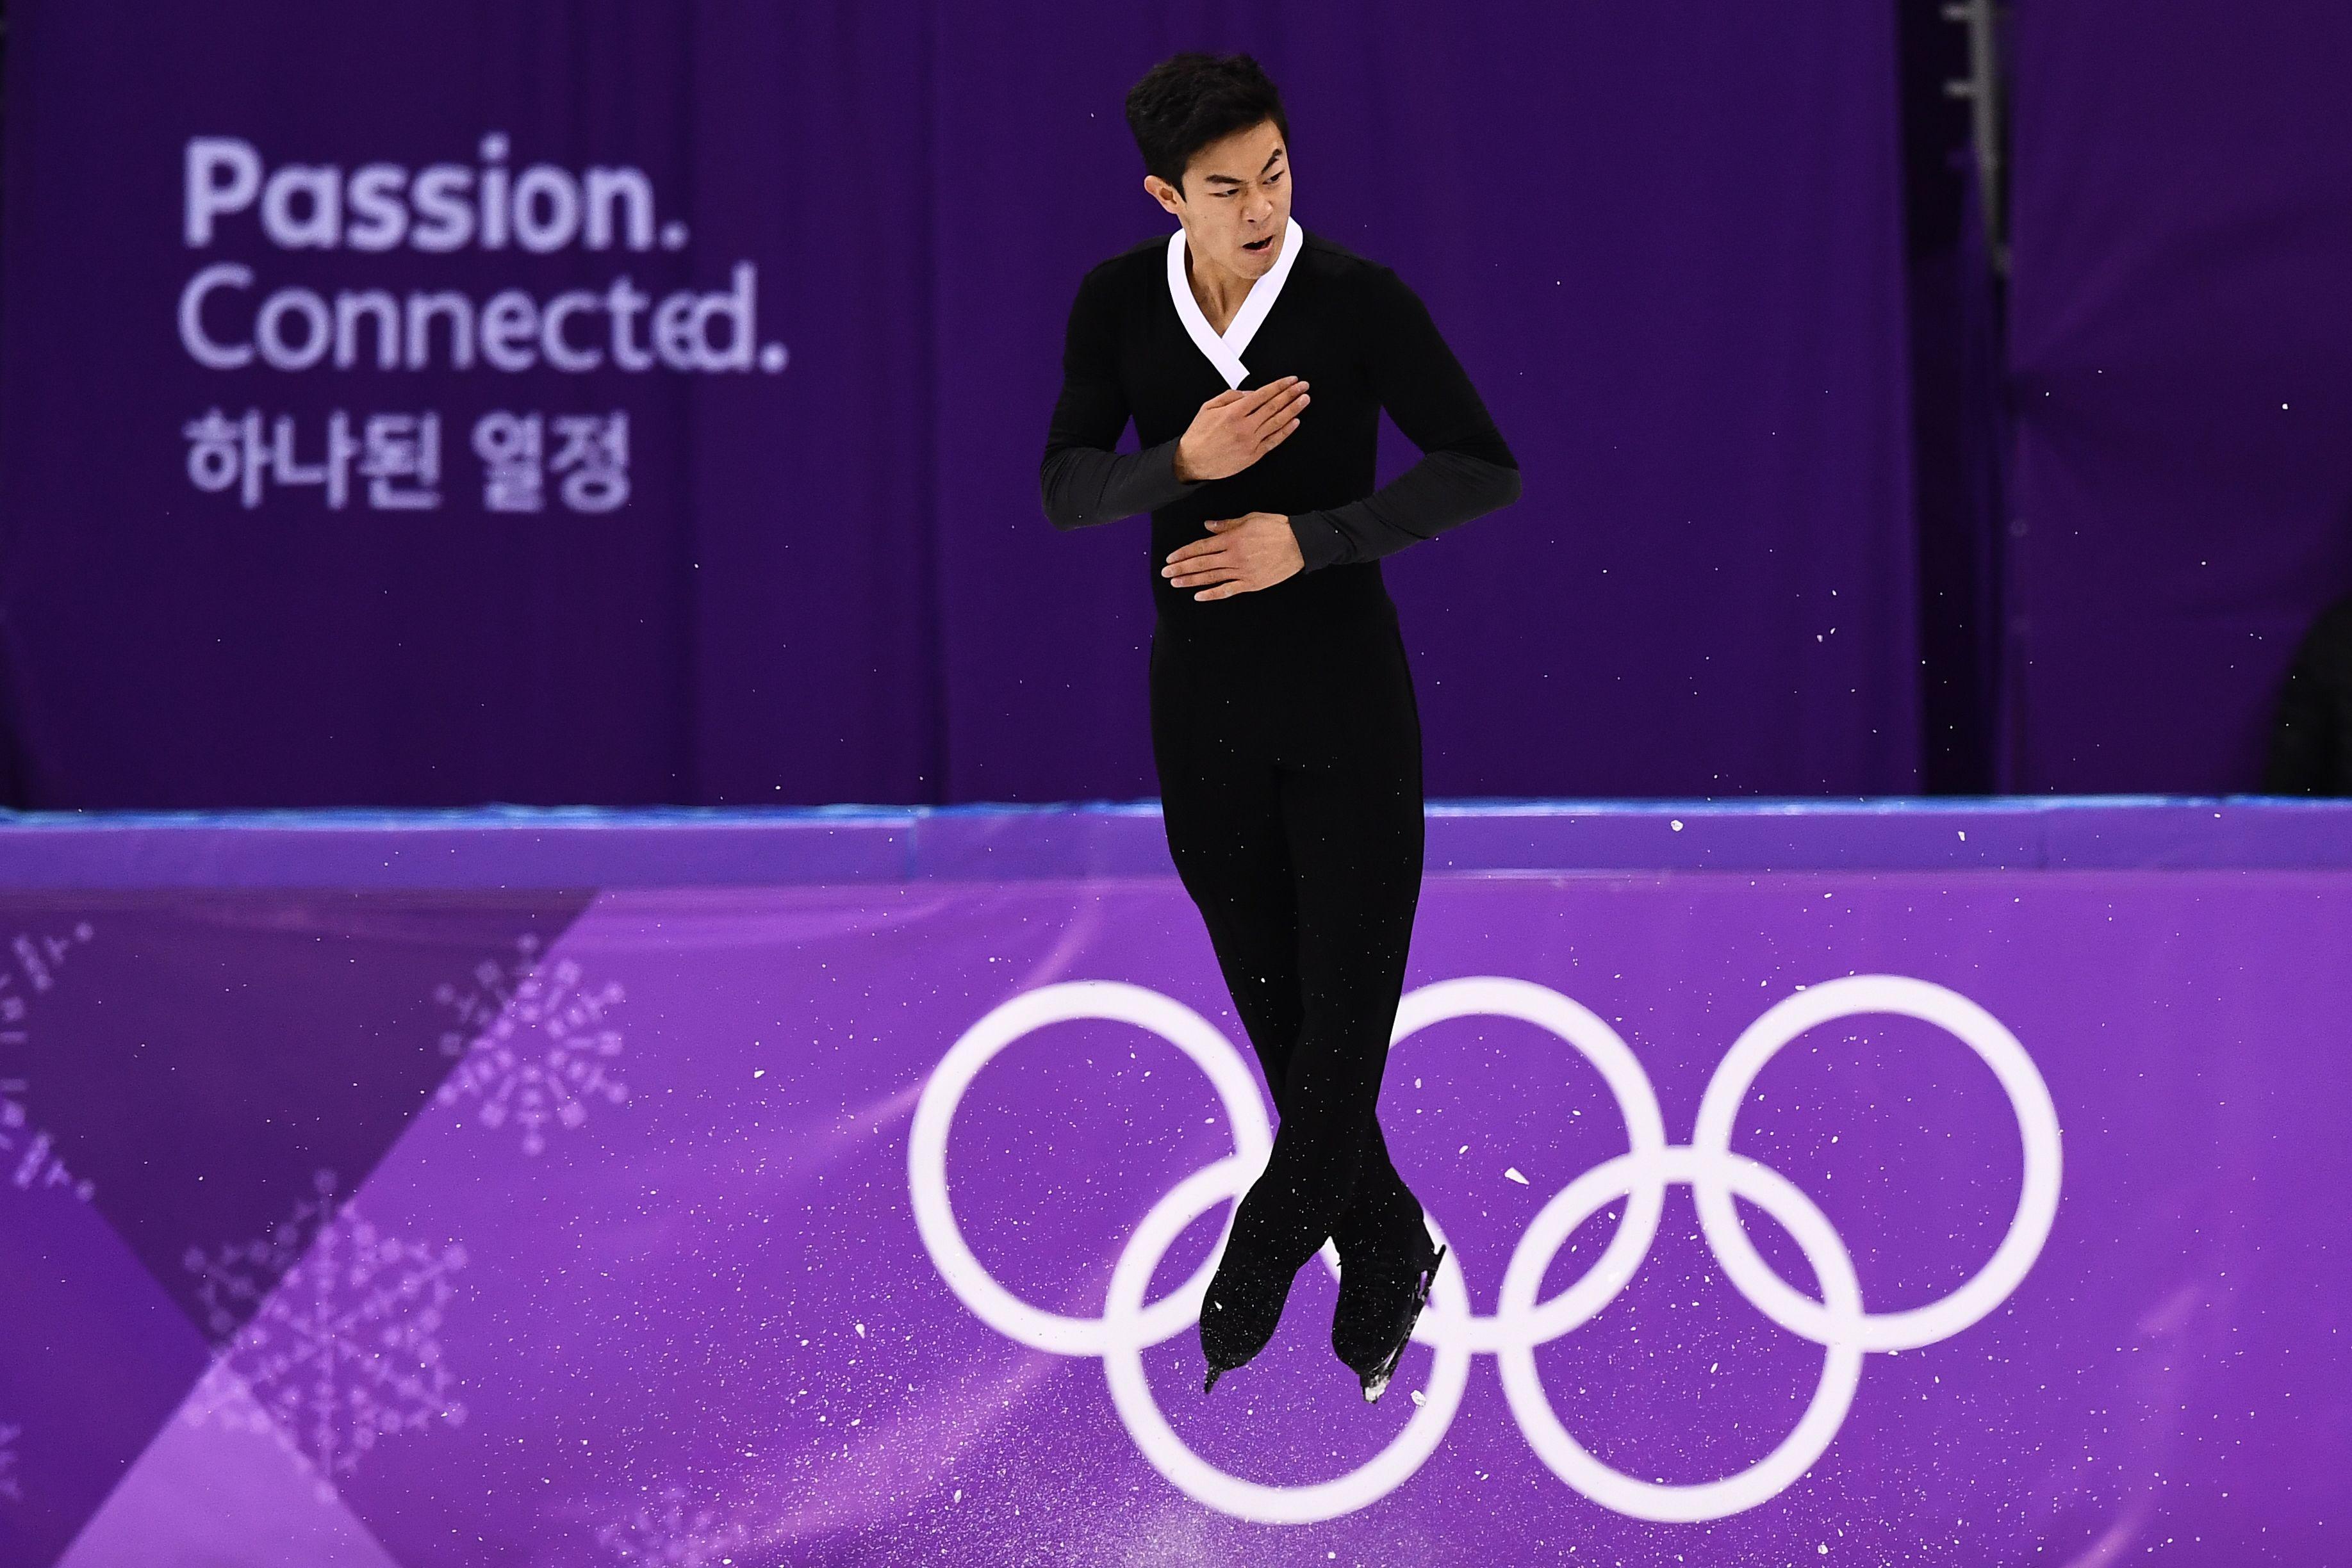 Nathan Chen is the future of figure skating, but the sport shouldnt abandon its past.